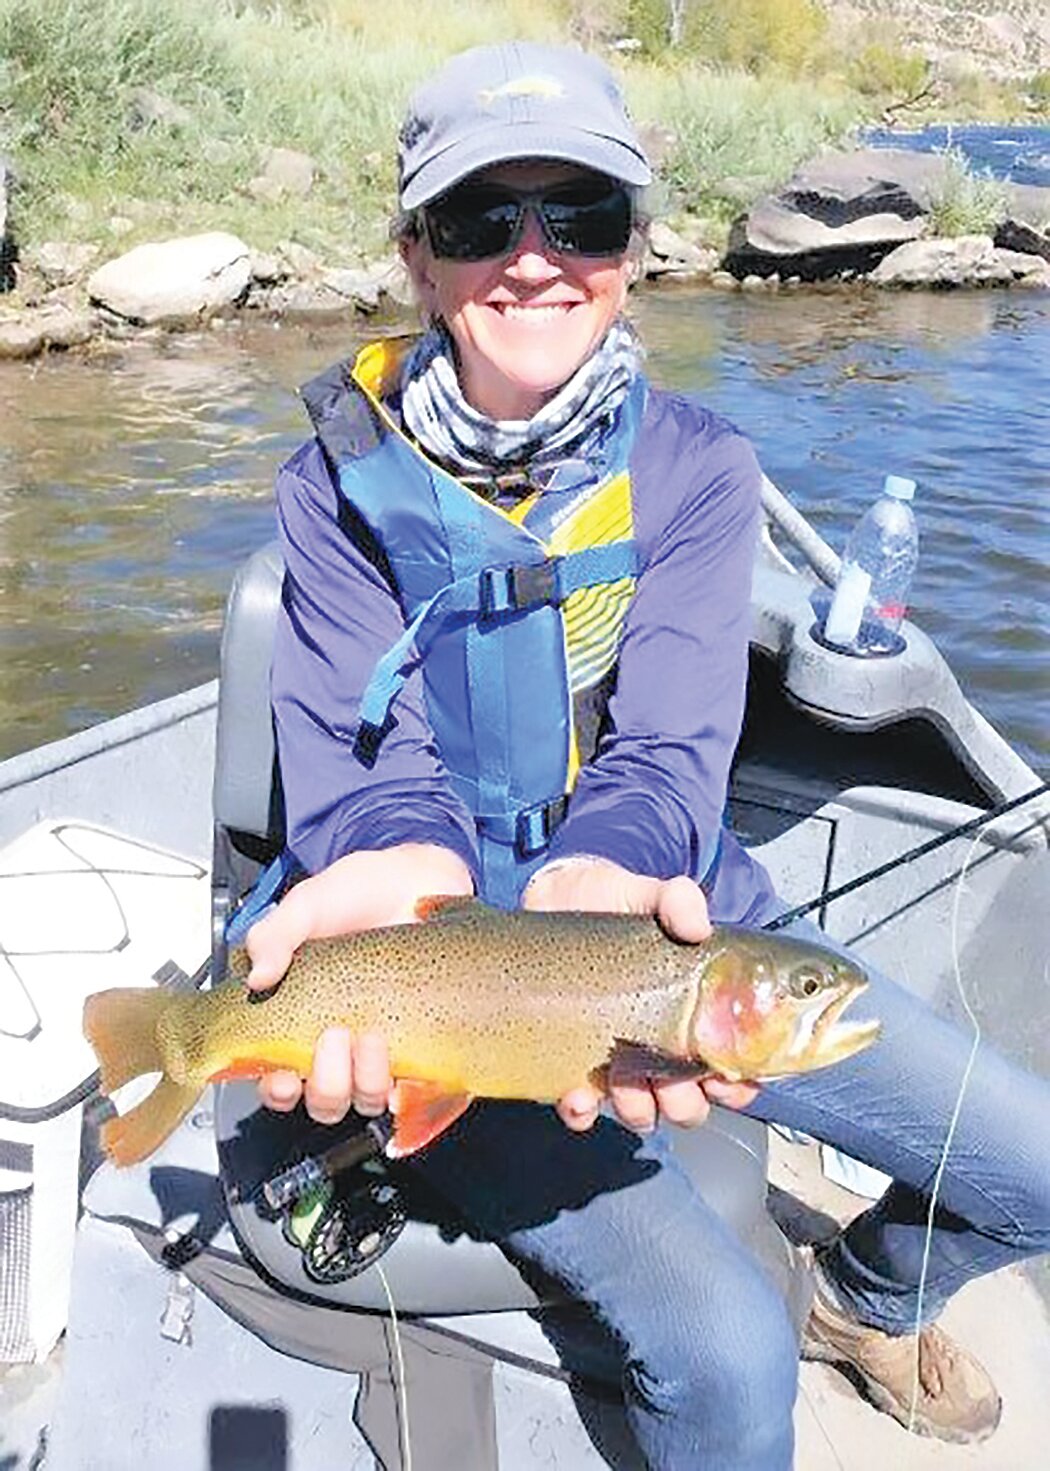 Susan Estabrook is coordinating a Women’s Introductory Fly Fishing Clinic on Sept. 23. The Clinic is sponsored by RI Trout Unlimited in collaboration with the South Kingstown Land Trust.